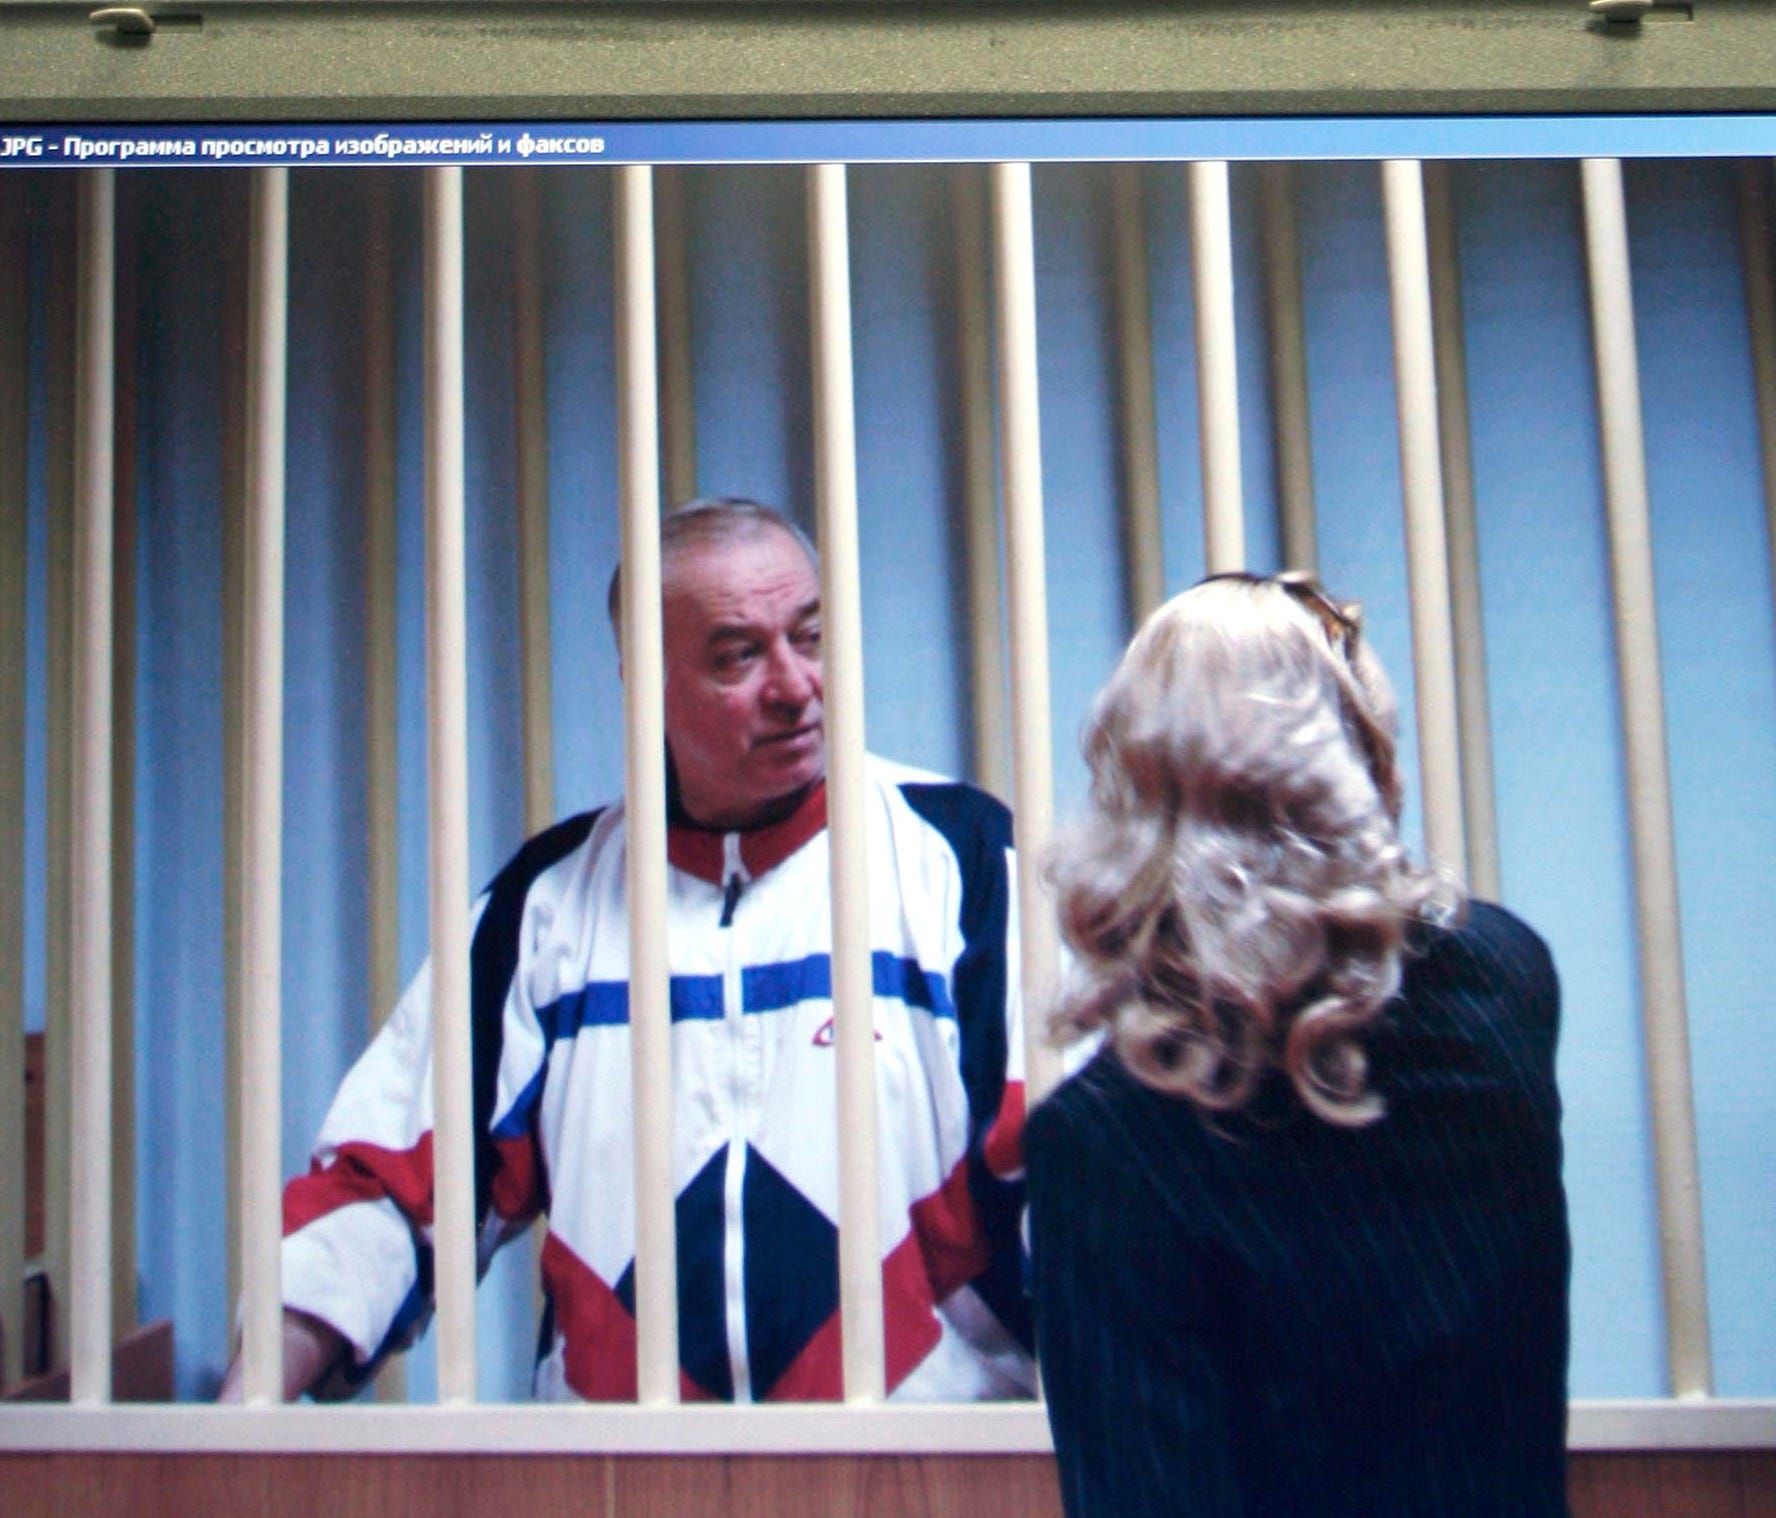 In this Aug. 9, 2006 photo, Sergei Skripal speaks to his lawyer from behind bars seen on a screen of a monitor outside a courtroom in Moscow. It has been reported on Monday, March 5, 2018 by the British media that Skripal is in critical condition aft